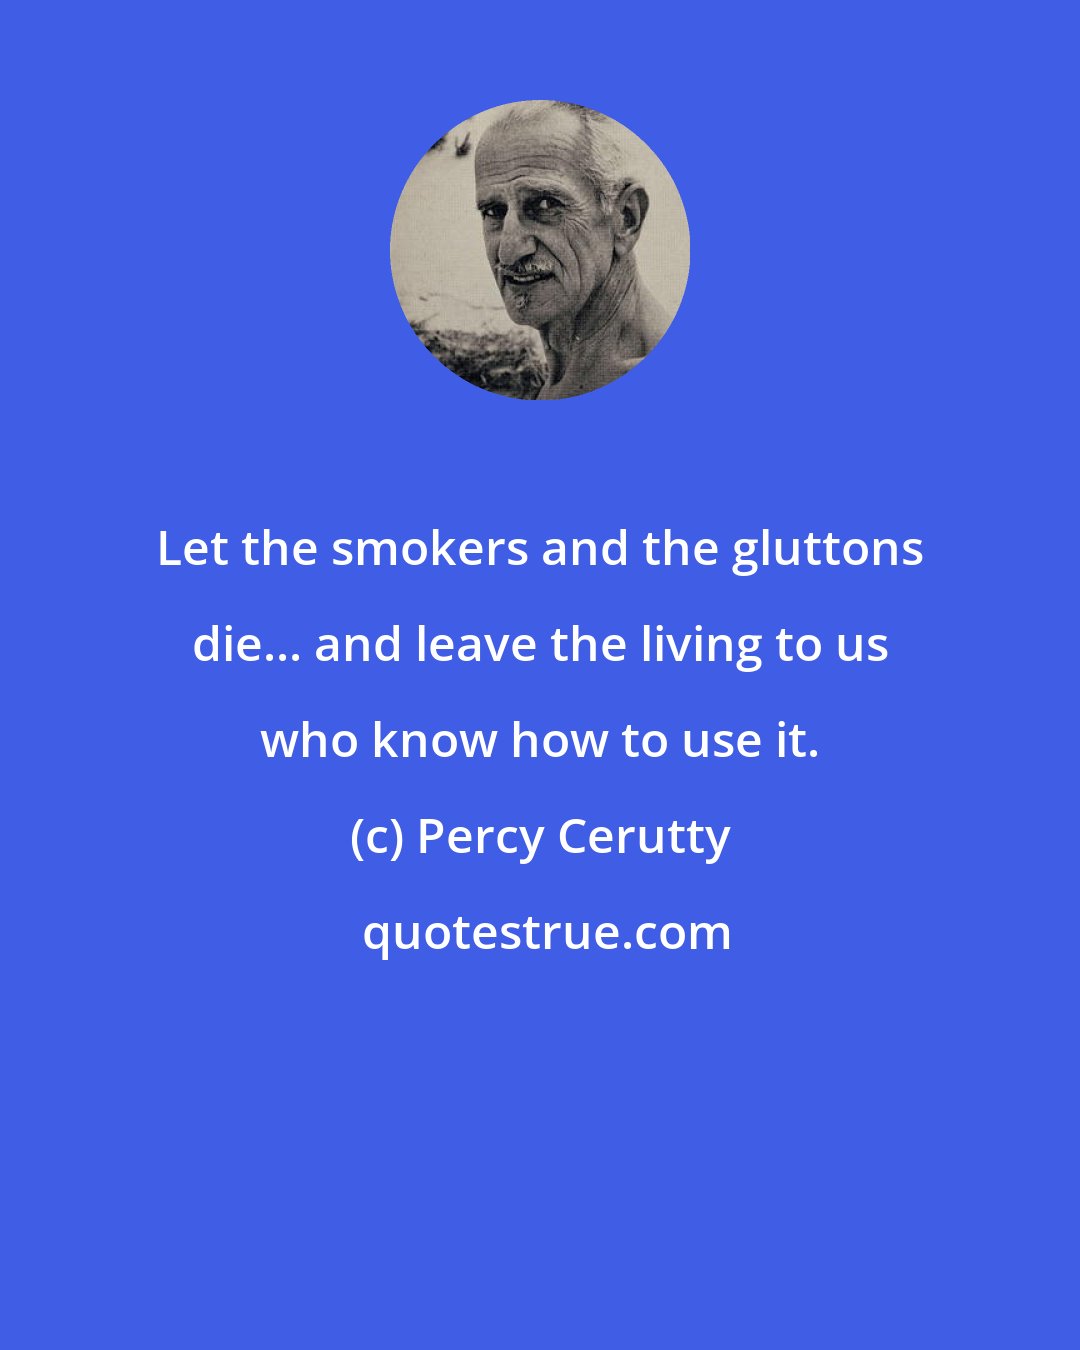 Percy Cerutty: Let the smokers and the gluttons die... and leave the living to us who know how to use it.